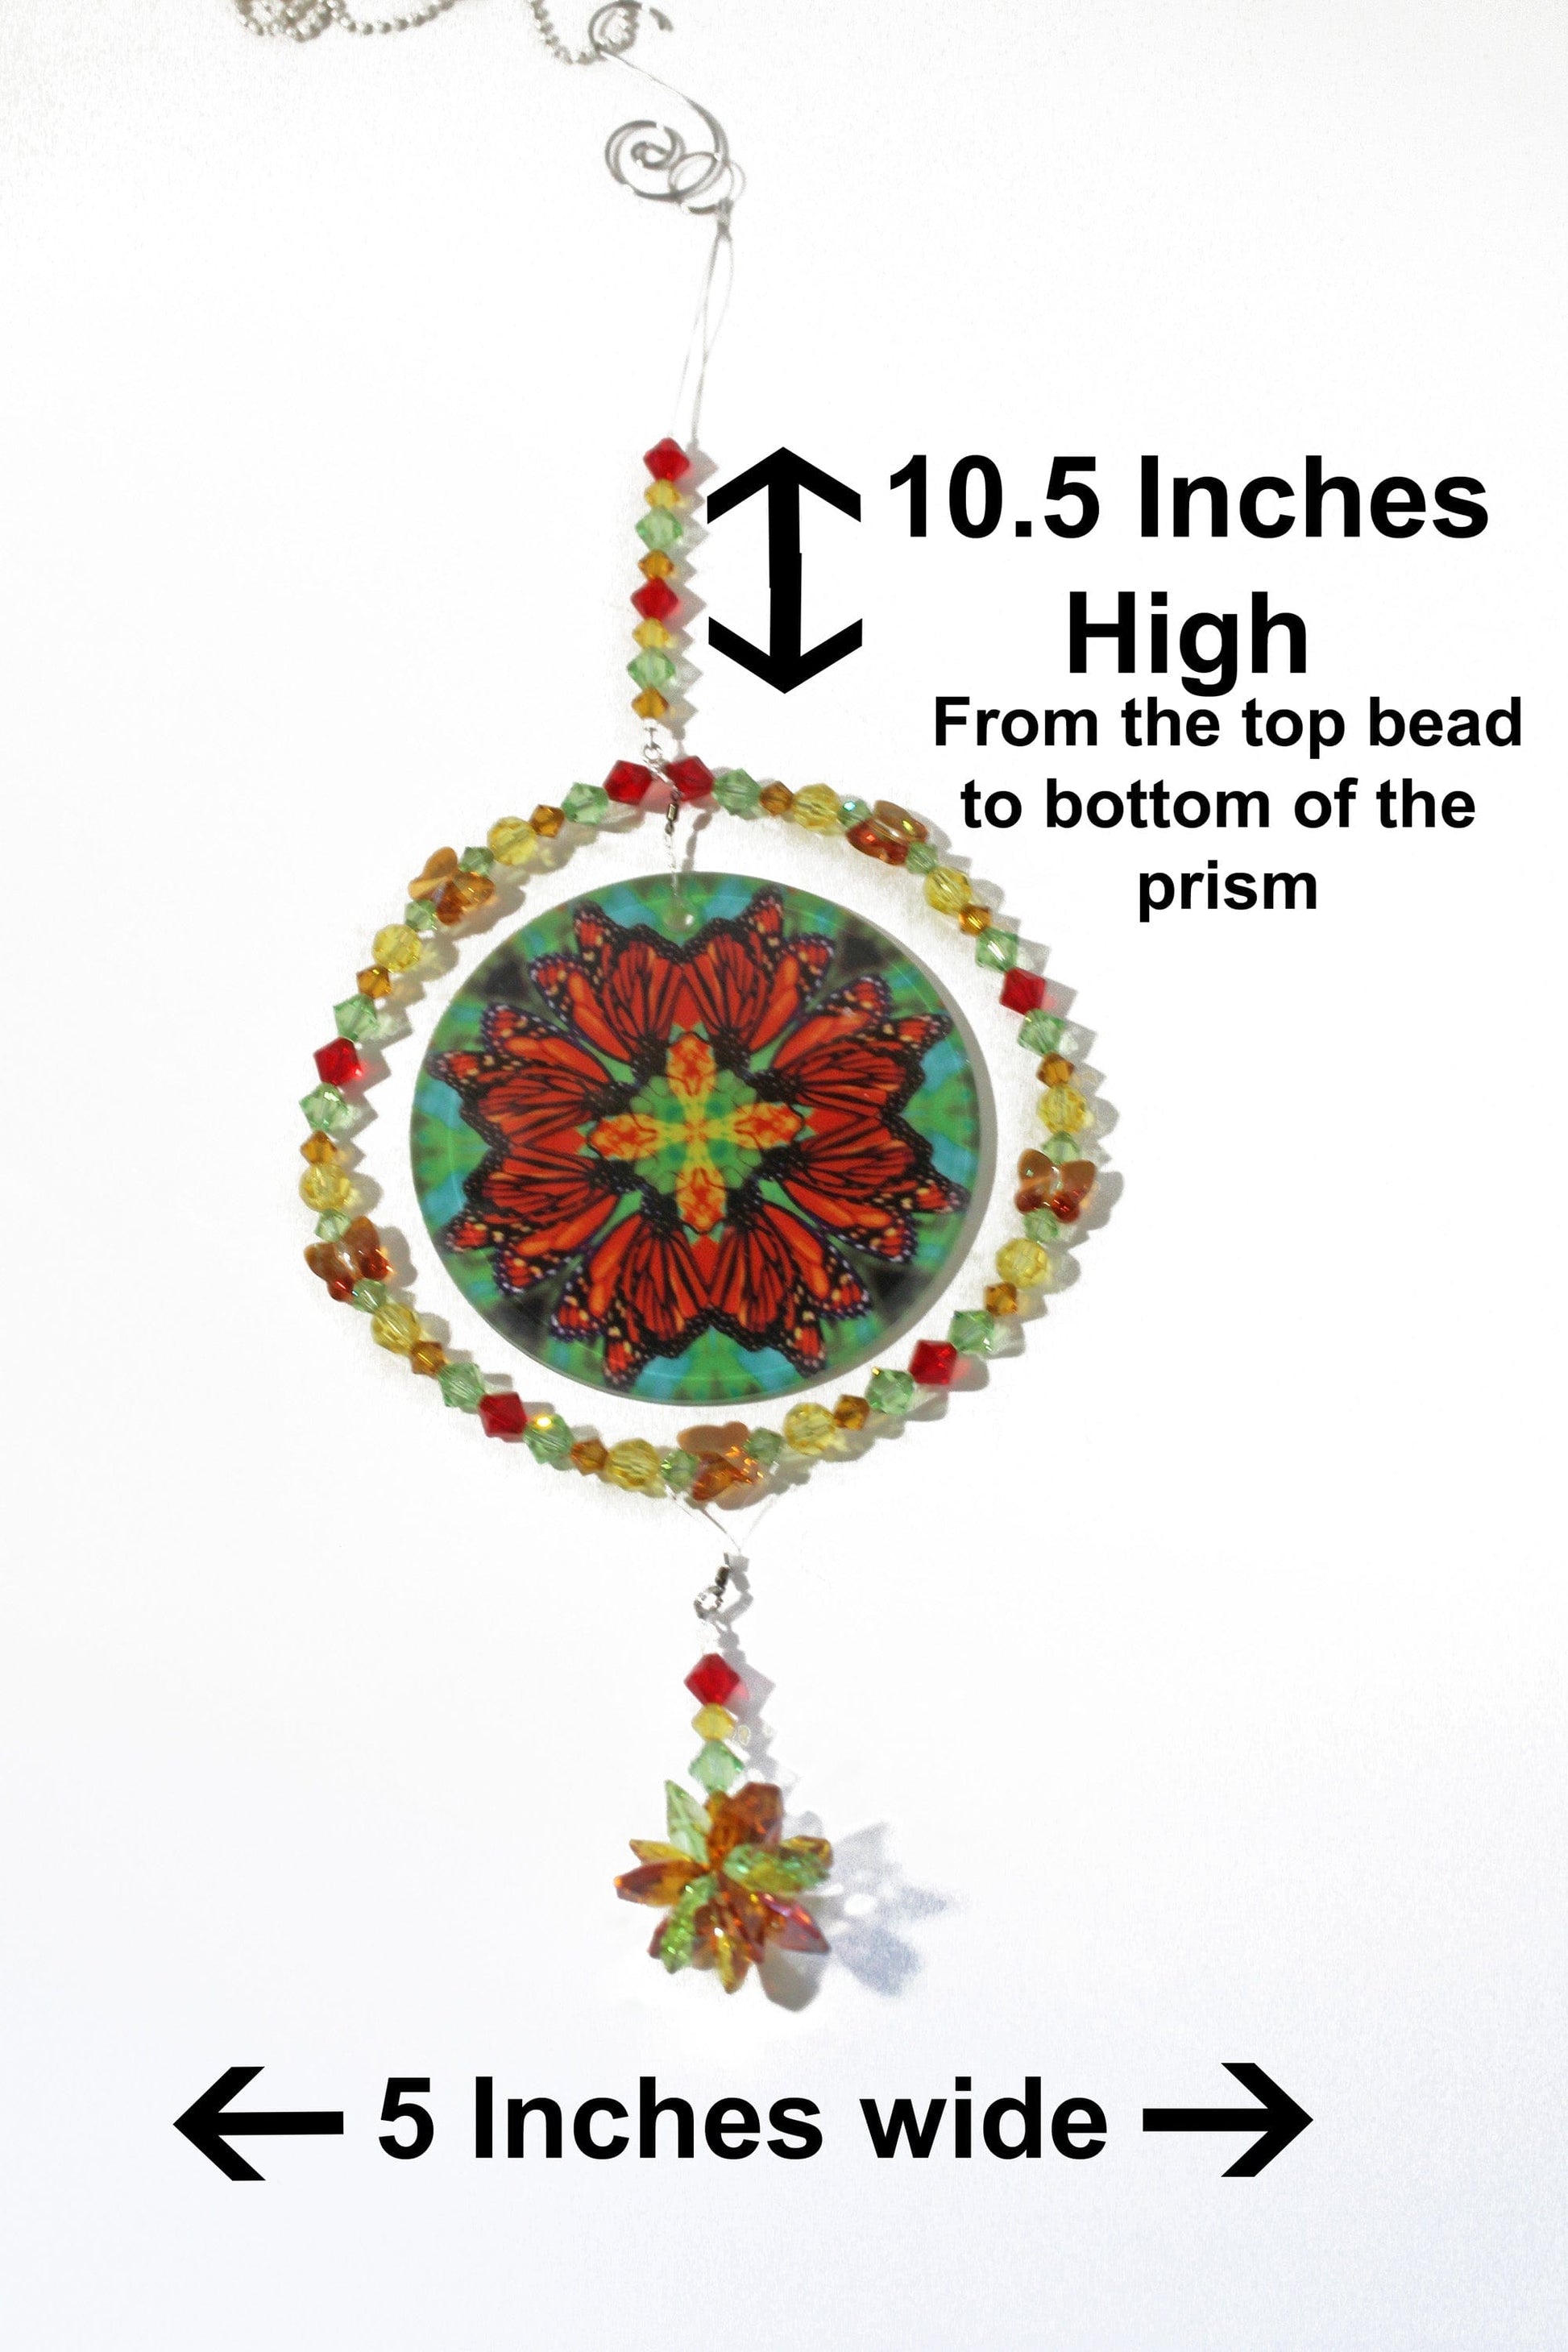 Monarch Butterfly Sunlight Catcher, Crystal Window Sun Catcher With Swarovski Crystals & Prism, Mindfulness Gift, Timeless Treasure dimensions